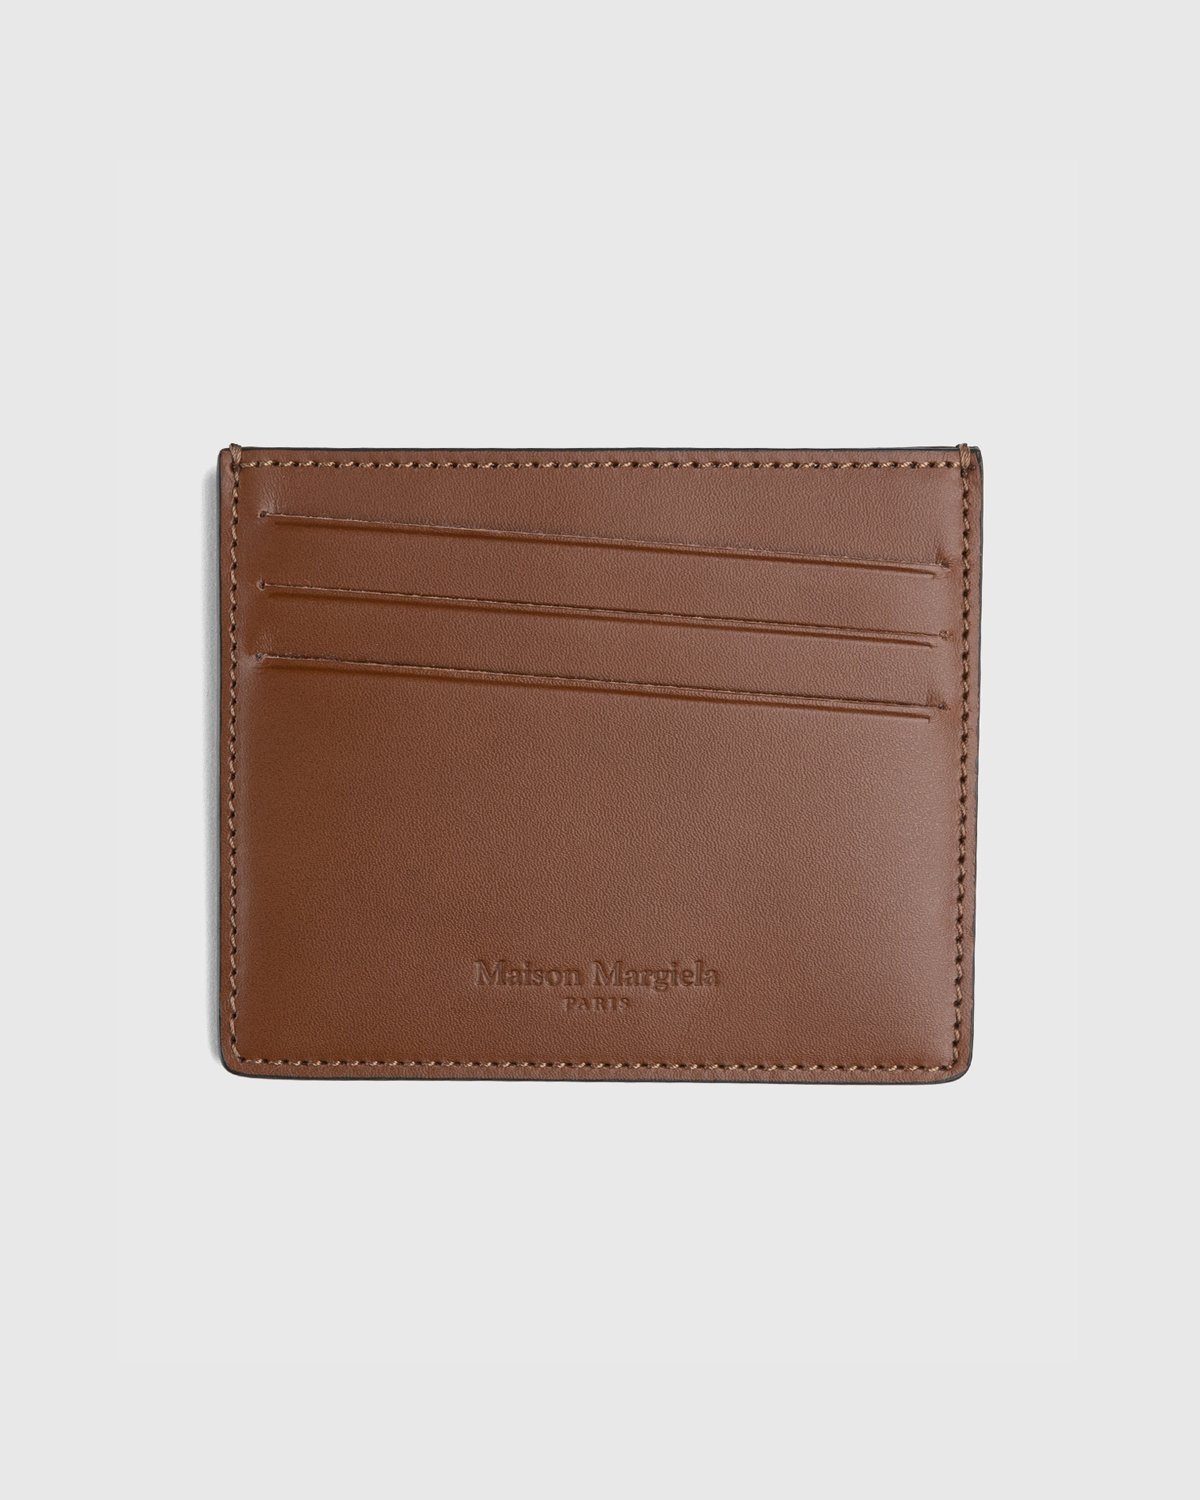 Maison Margiela - Leather Card Holder Brown - Accessories - Brown - Image 1